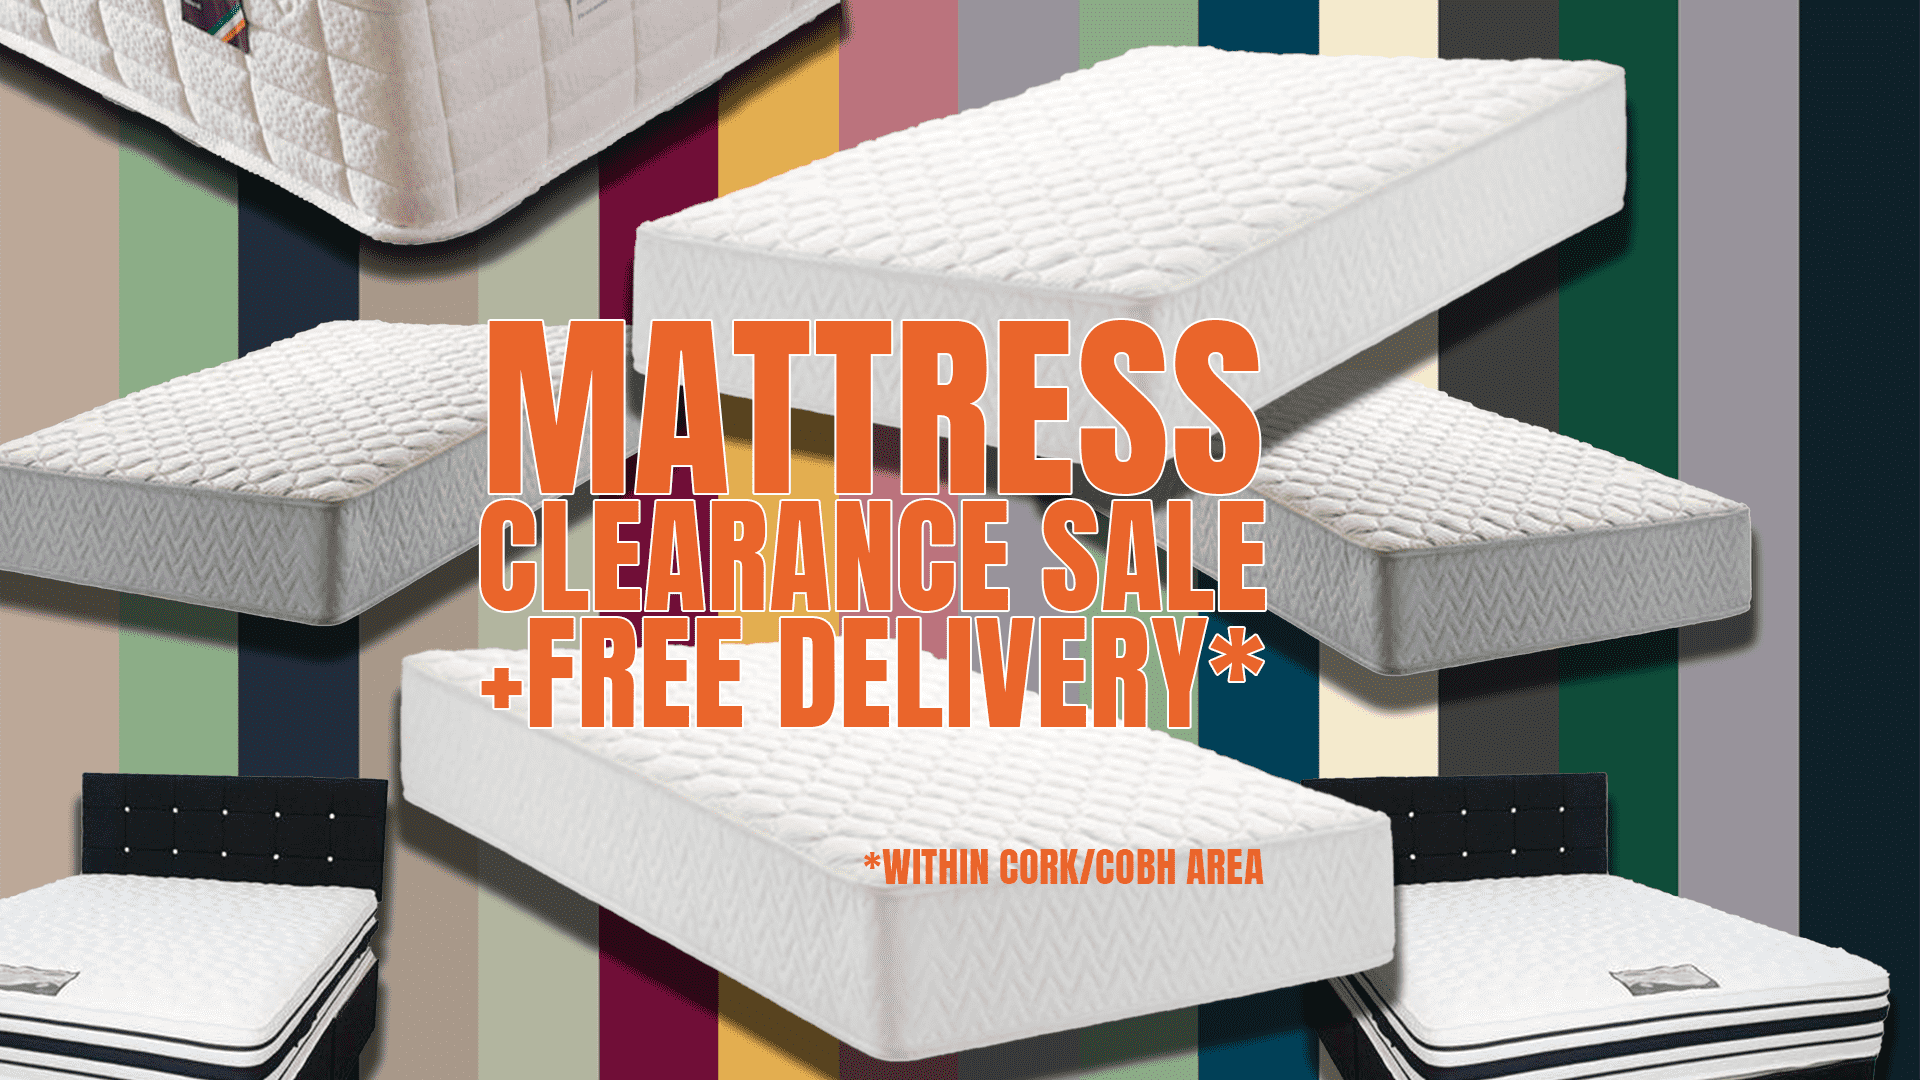 MATTRESS CLEARANCE SALE + FREE DELIVERY*